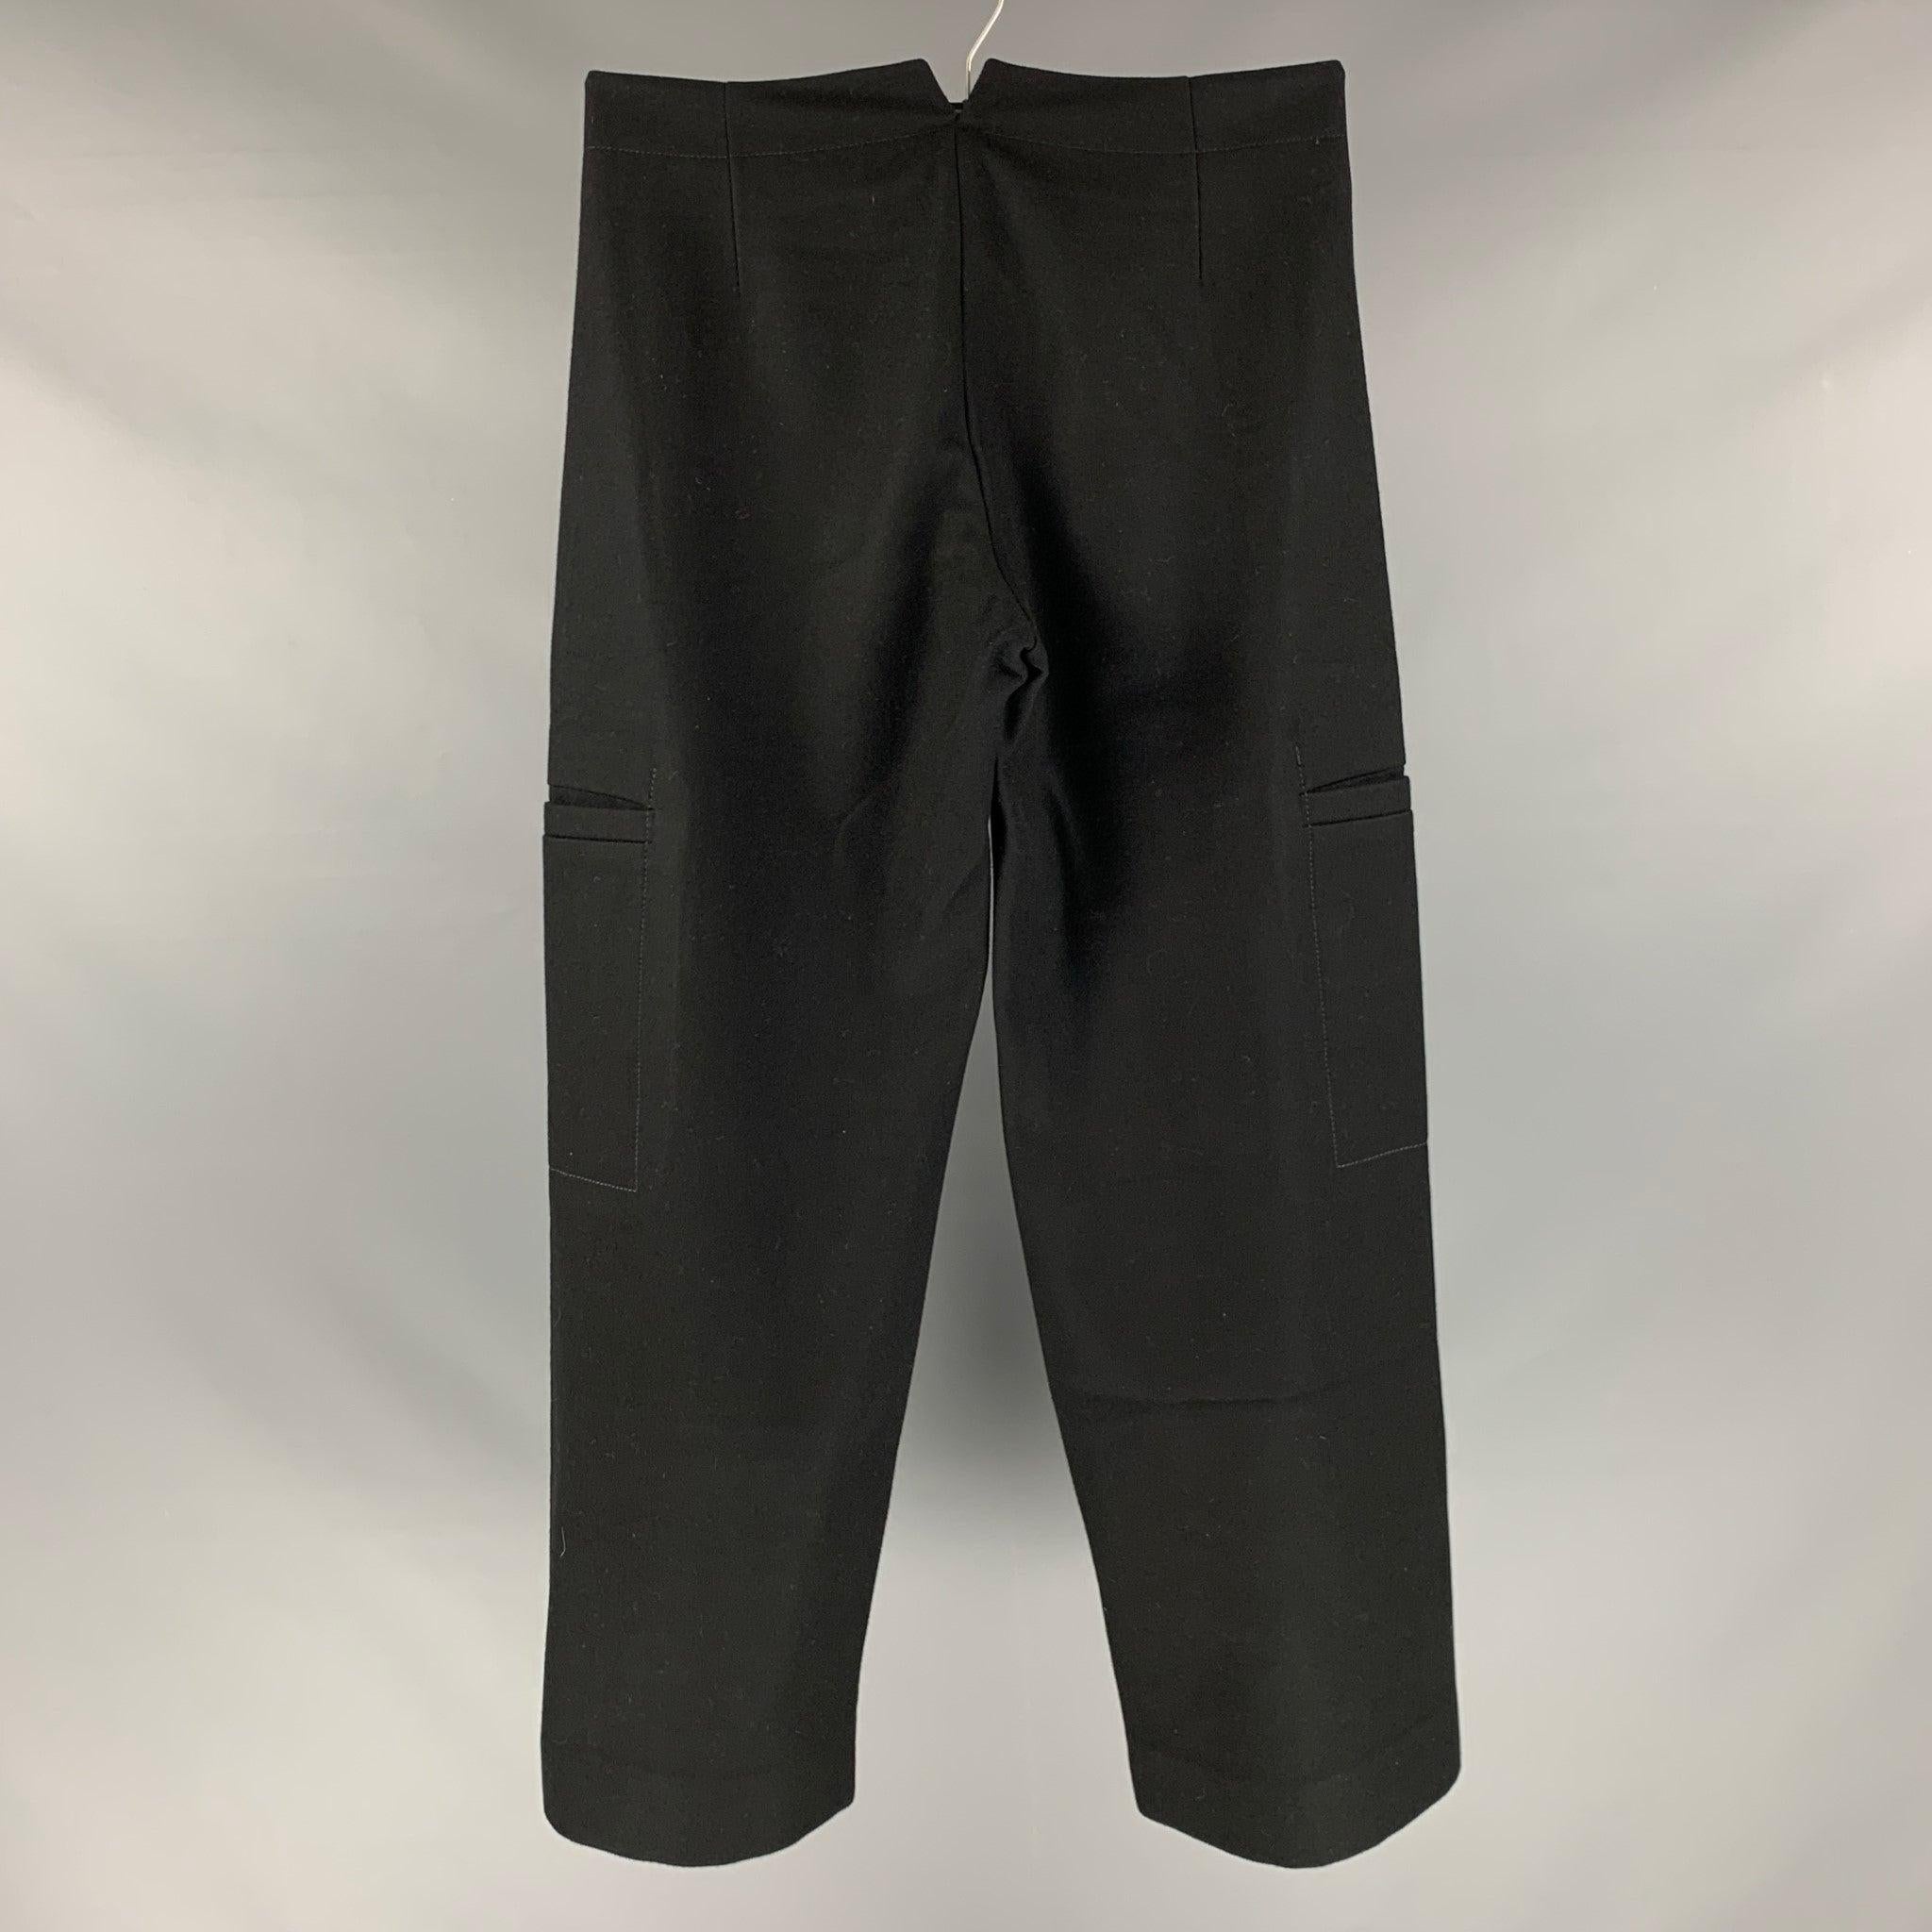 JOHN BARTLETT casual cargo pants comes in a black wool blend woven material featuring a velcro bib,
 side pockets,
 and zipper fly closure.Excellent Pre-Owned Condition. 

Marked:   48 

Measurements: 
  Waist: 32 inches  Rise: 10.5 inches  Inseam: